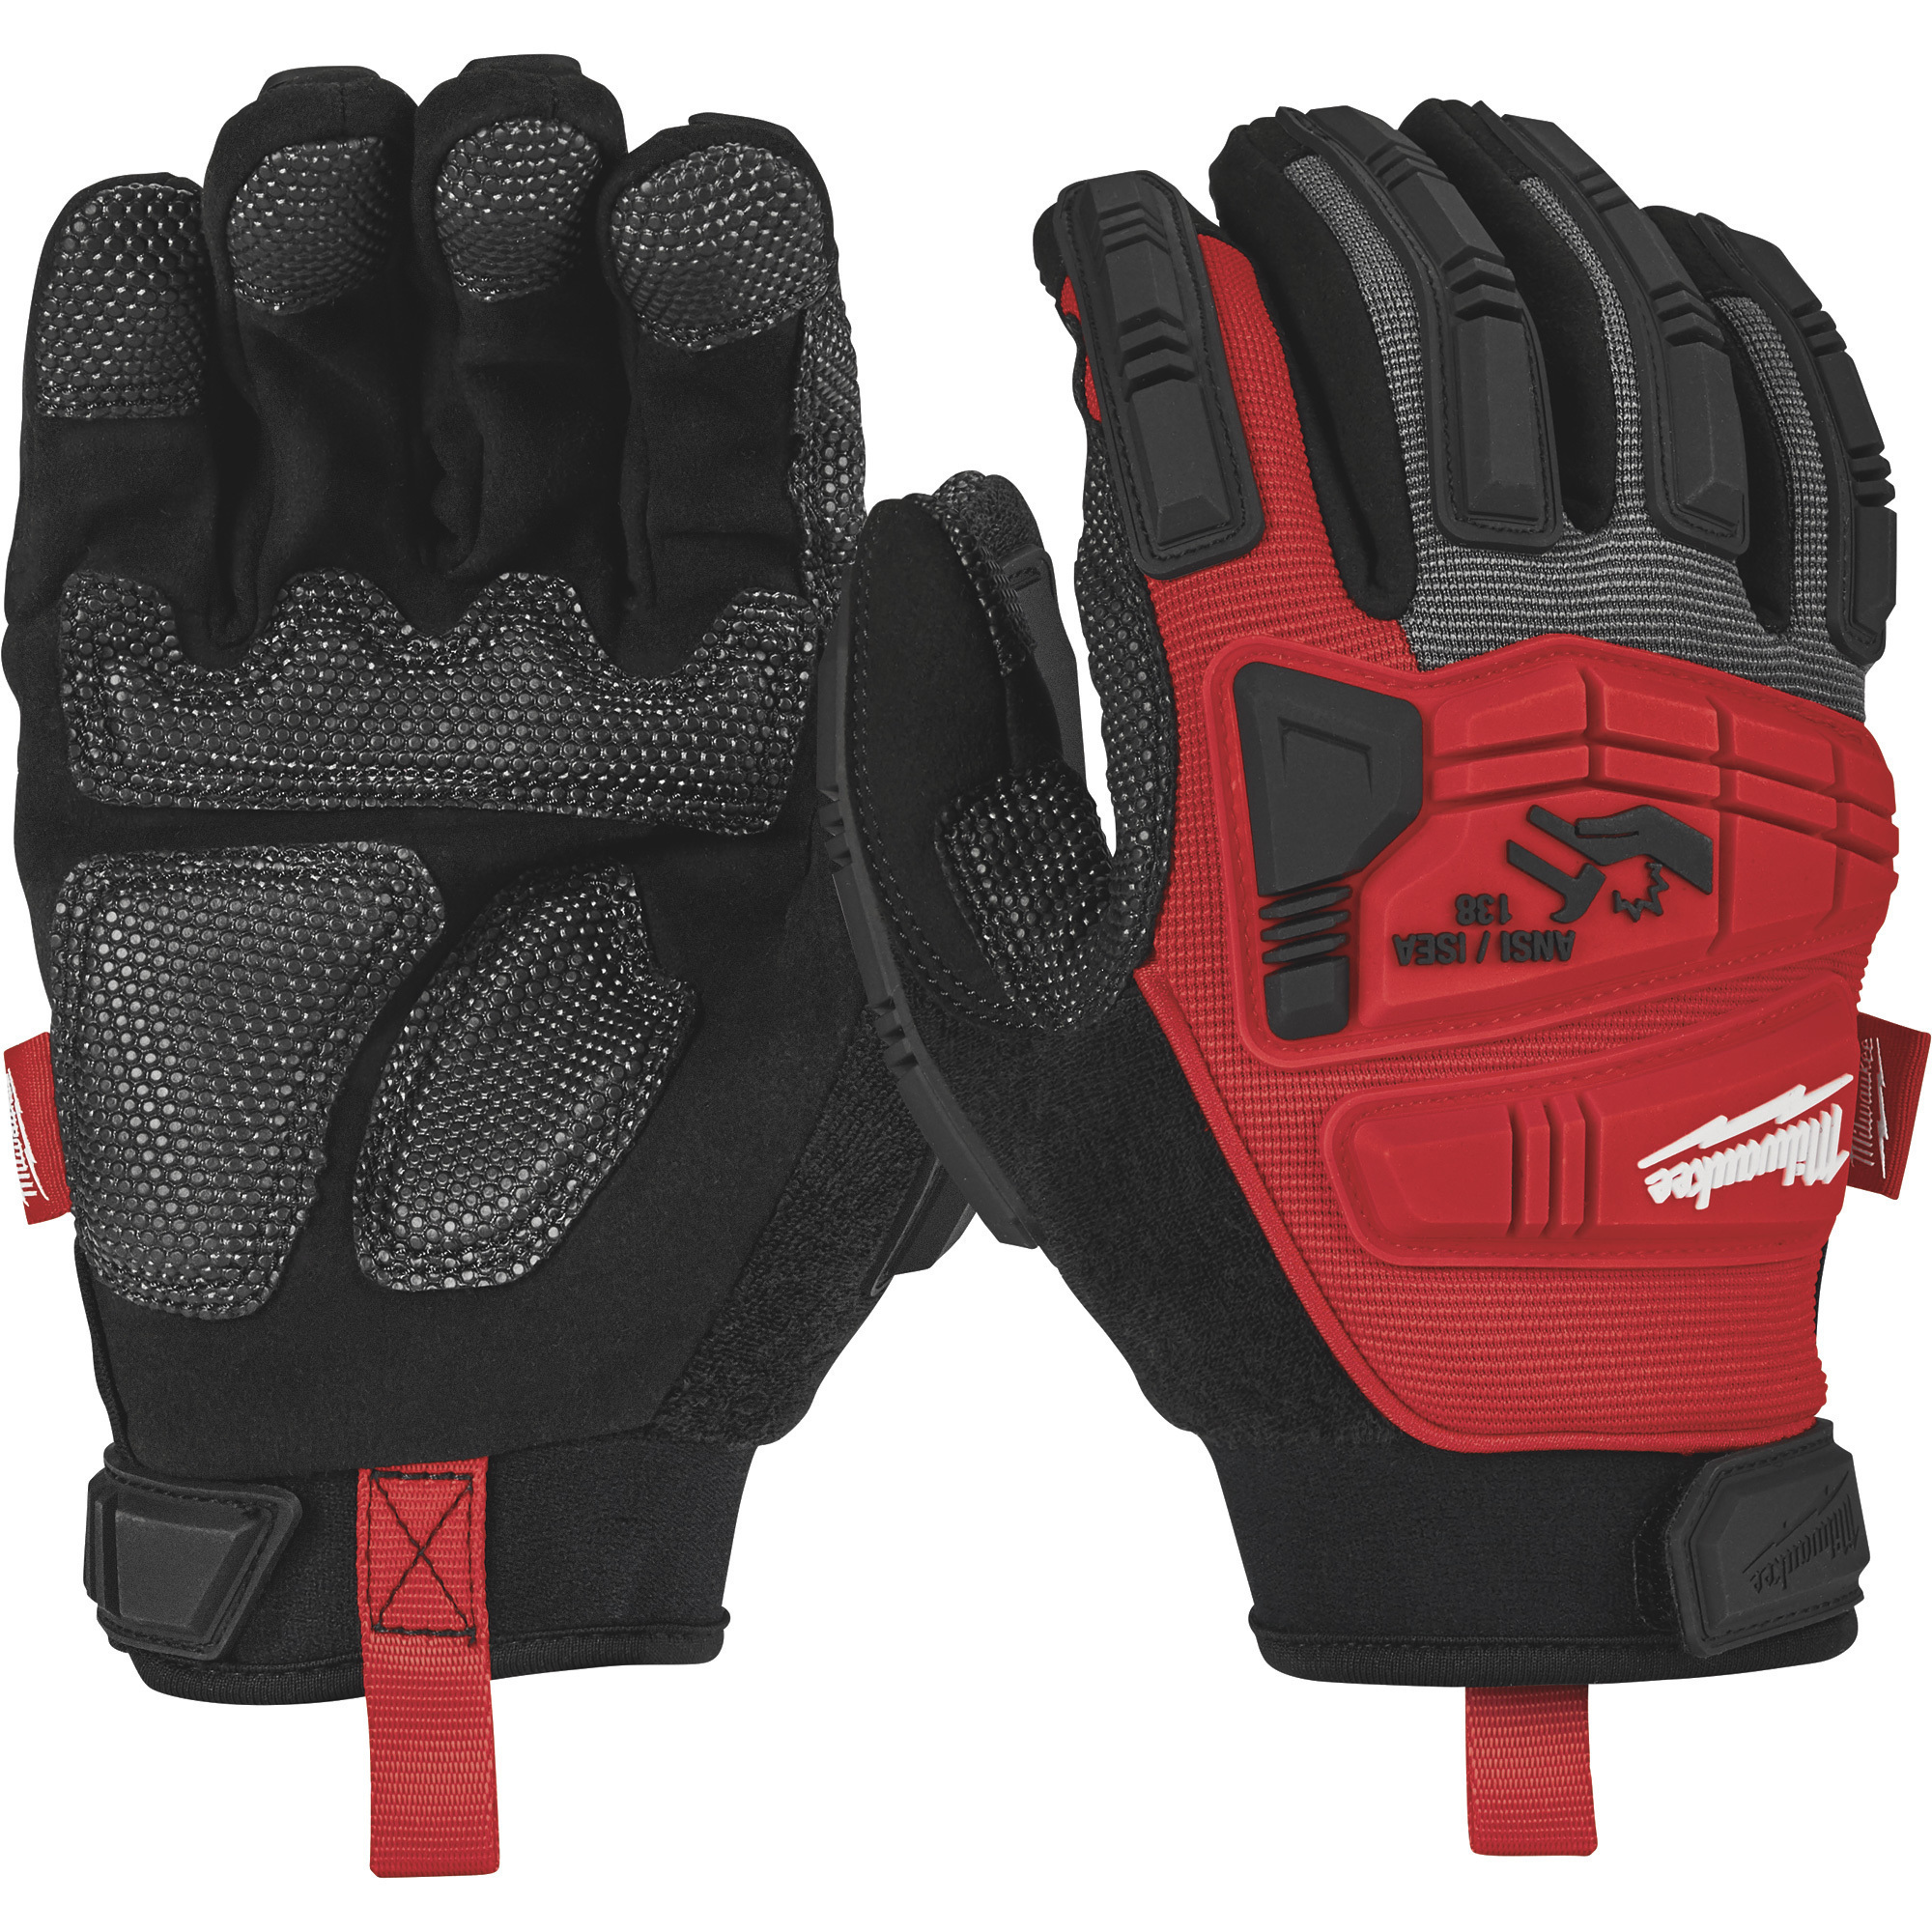 Milwaukee Men's Level 2 Impact Demolition Protective Safety Gloves, Red/Black, XL, Model 48-22-8753